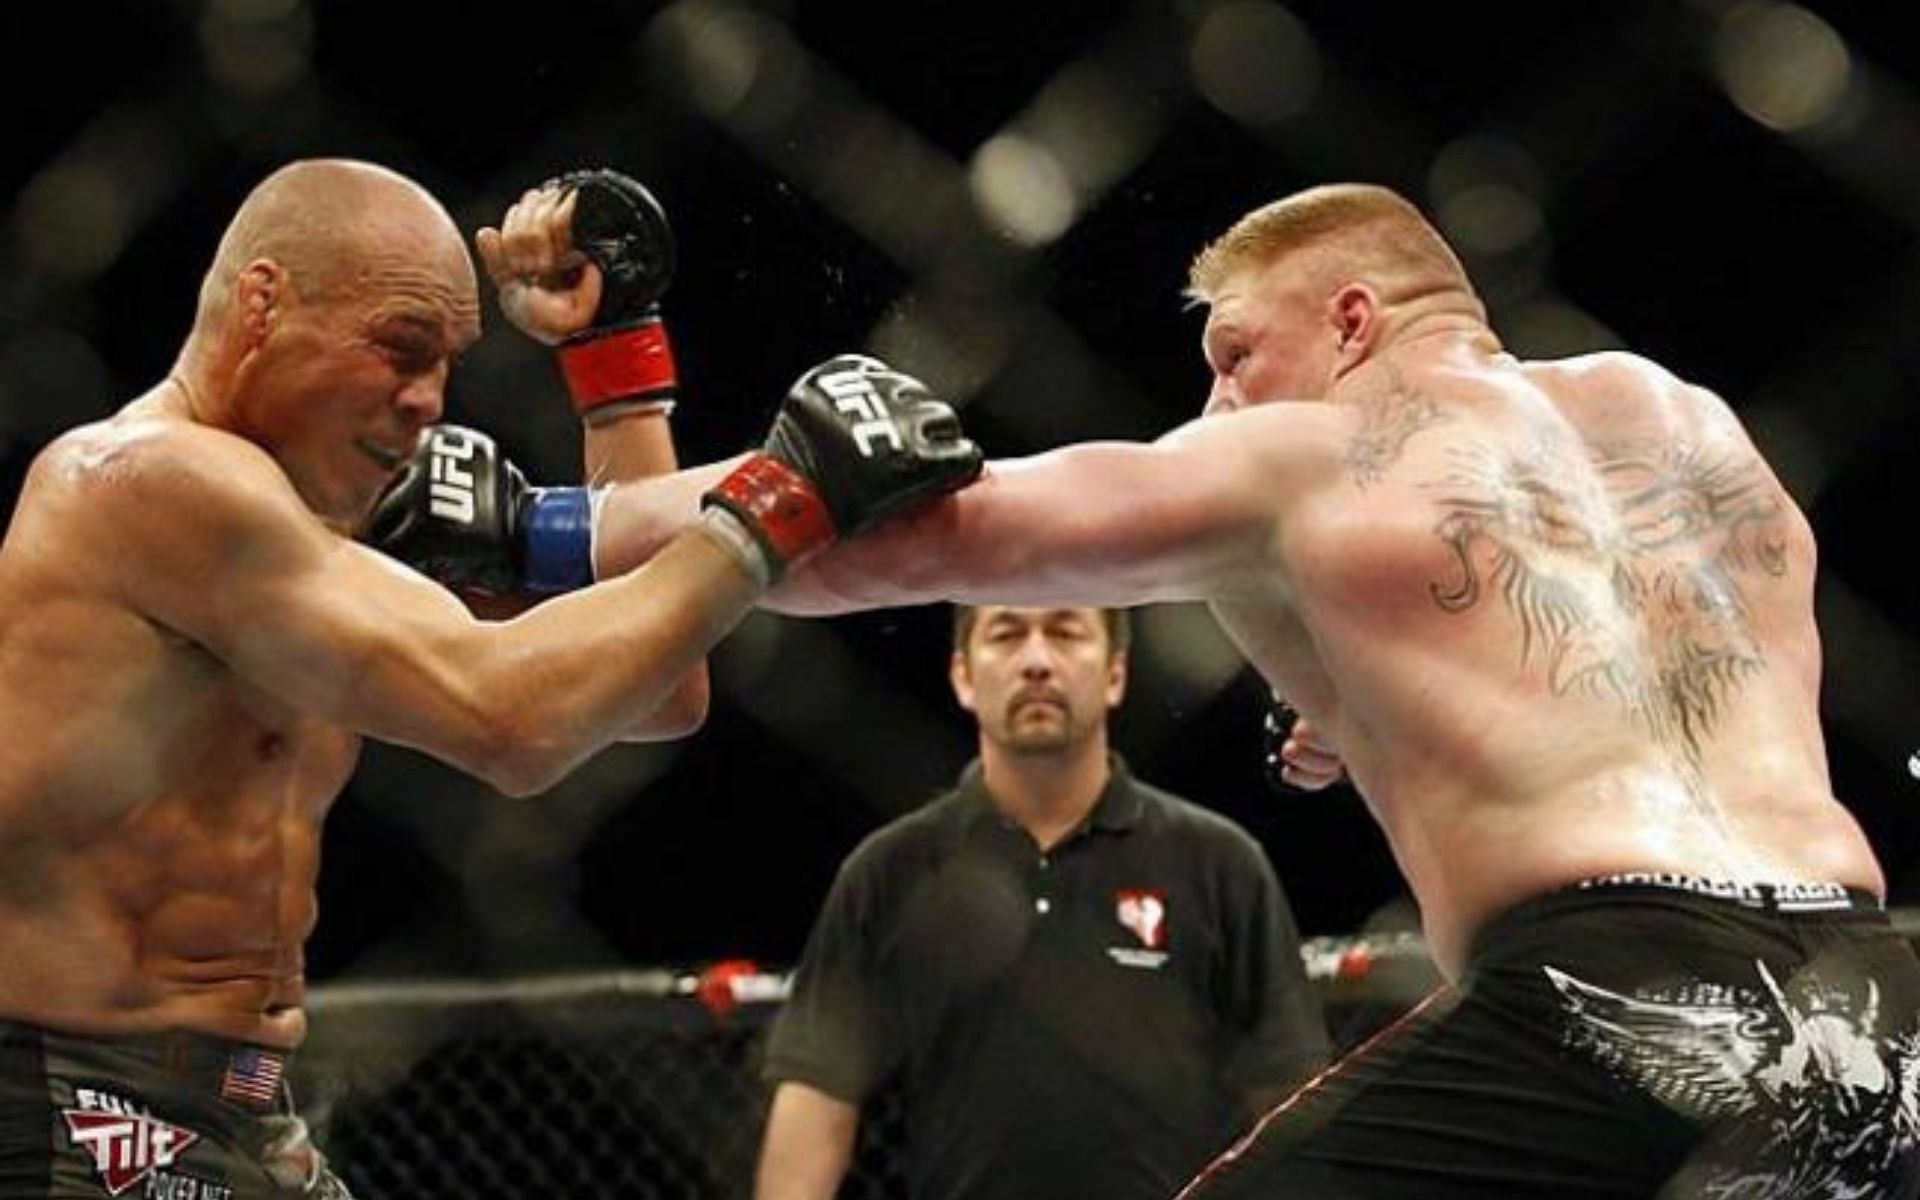 Brock Lesnar had not really earned a UFC title shot in 2008, but his marketability got him one anyway